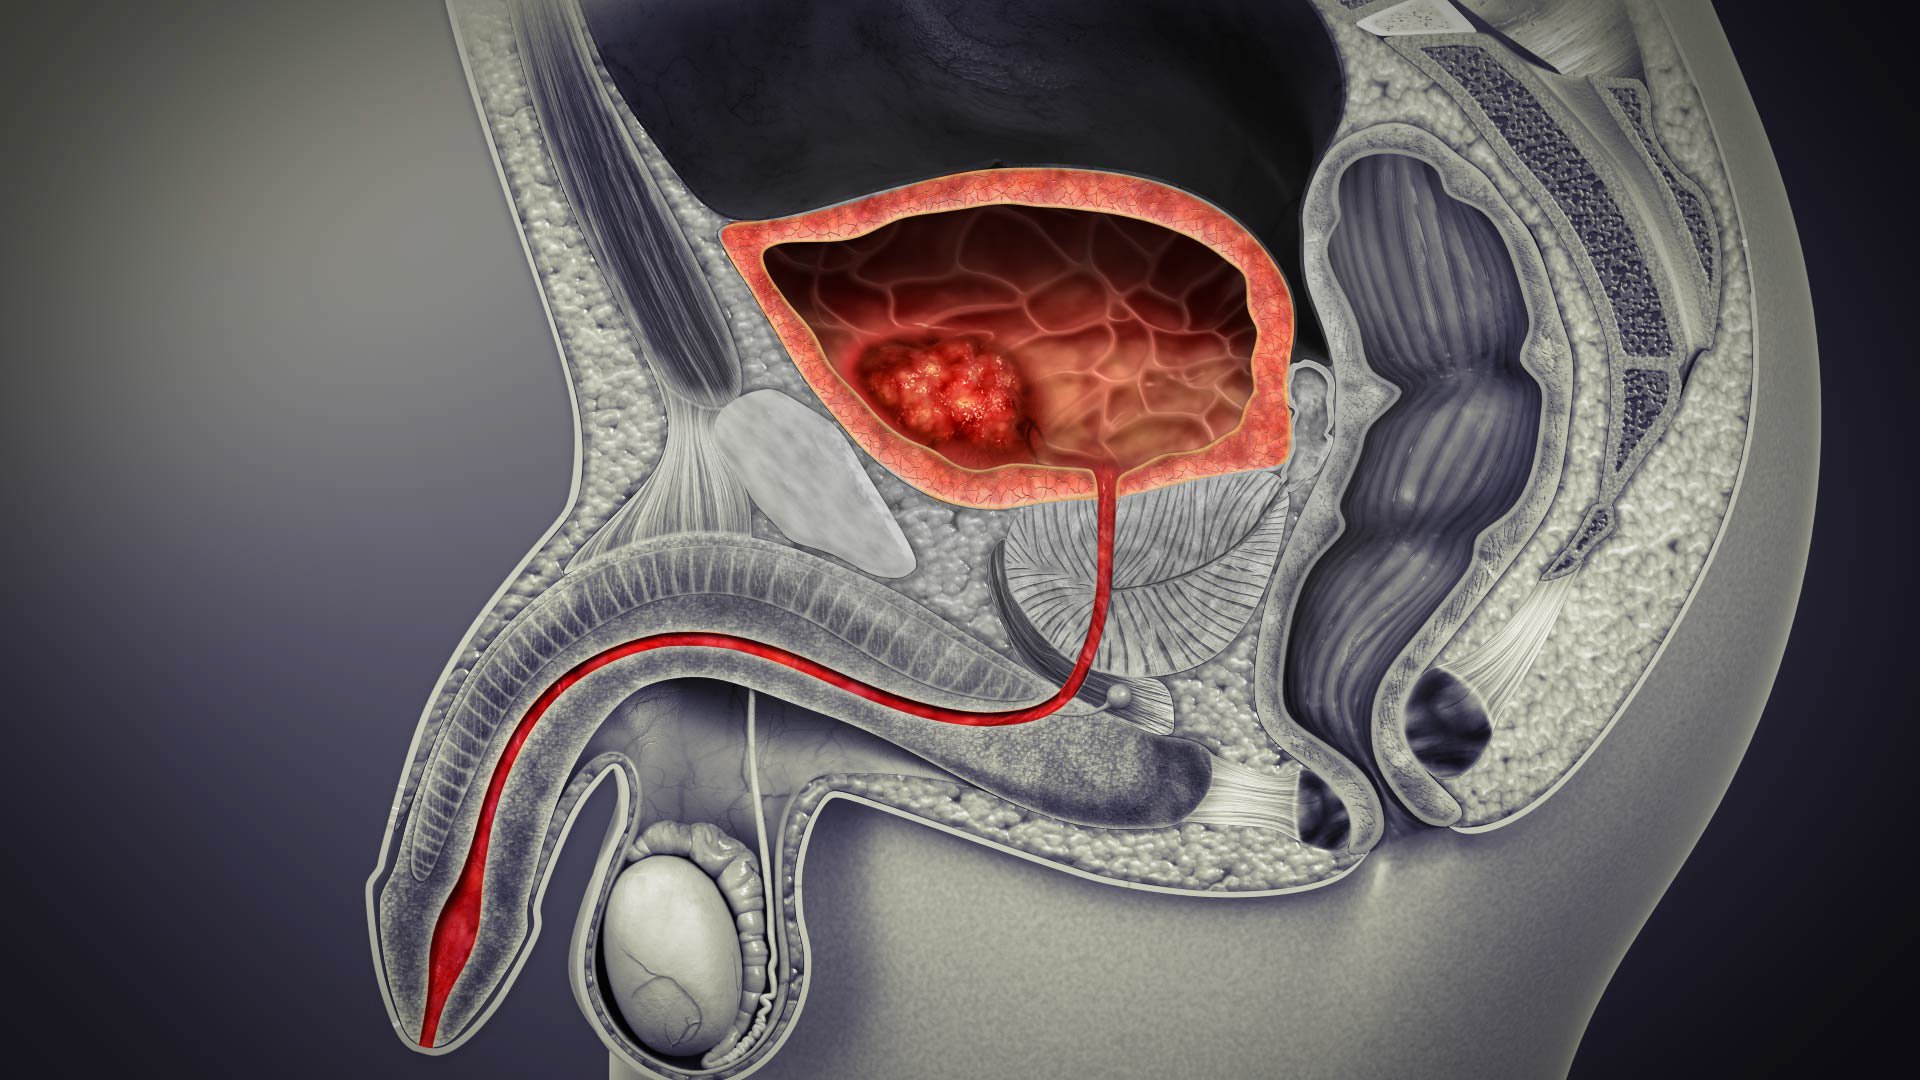 Bladder Cancer: Types, Symptoms, Causes, and Treatment